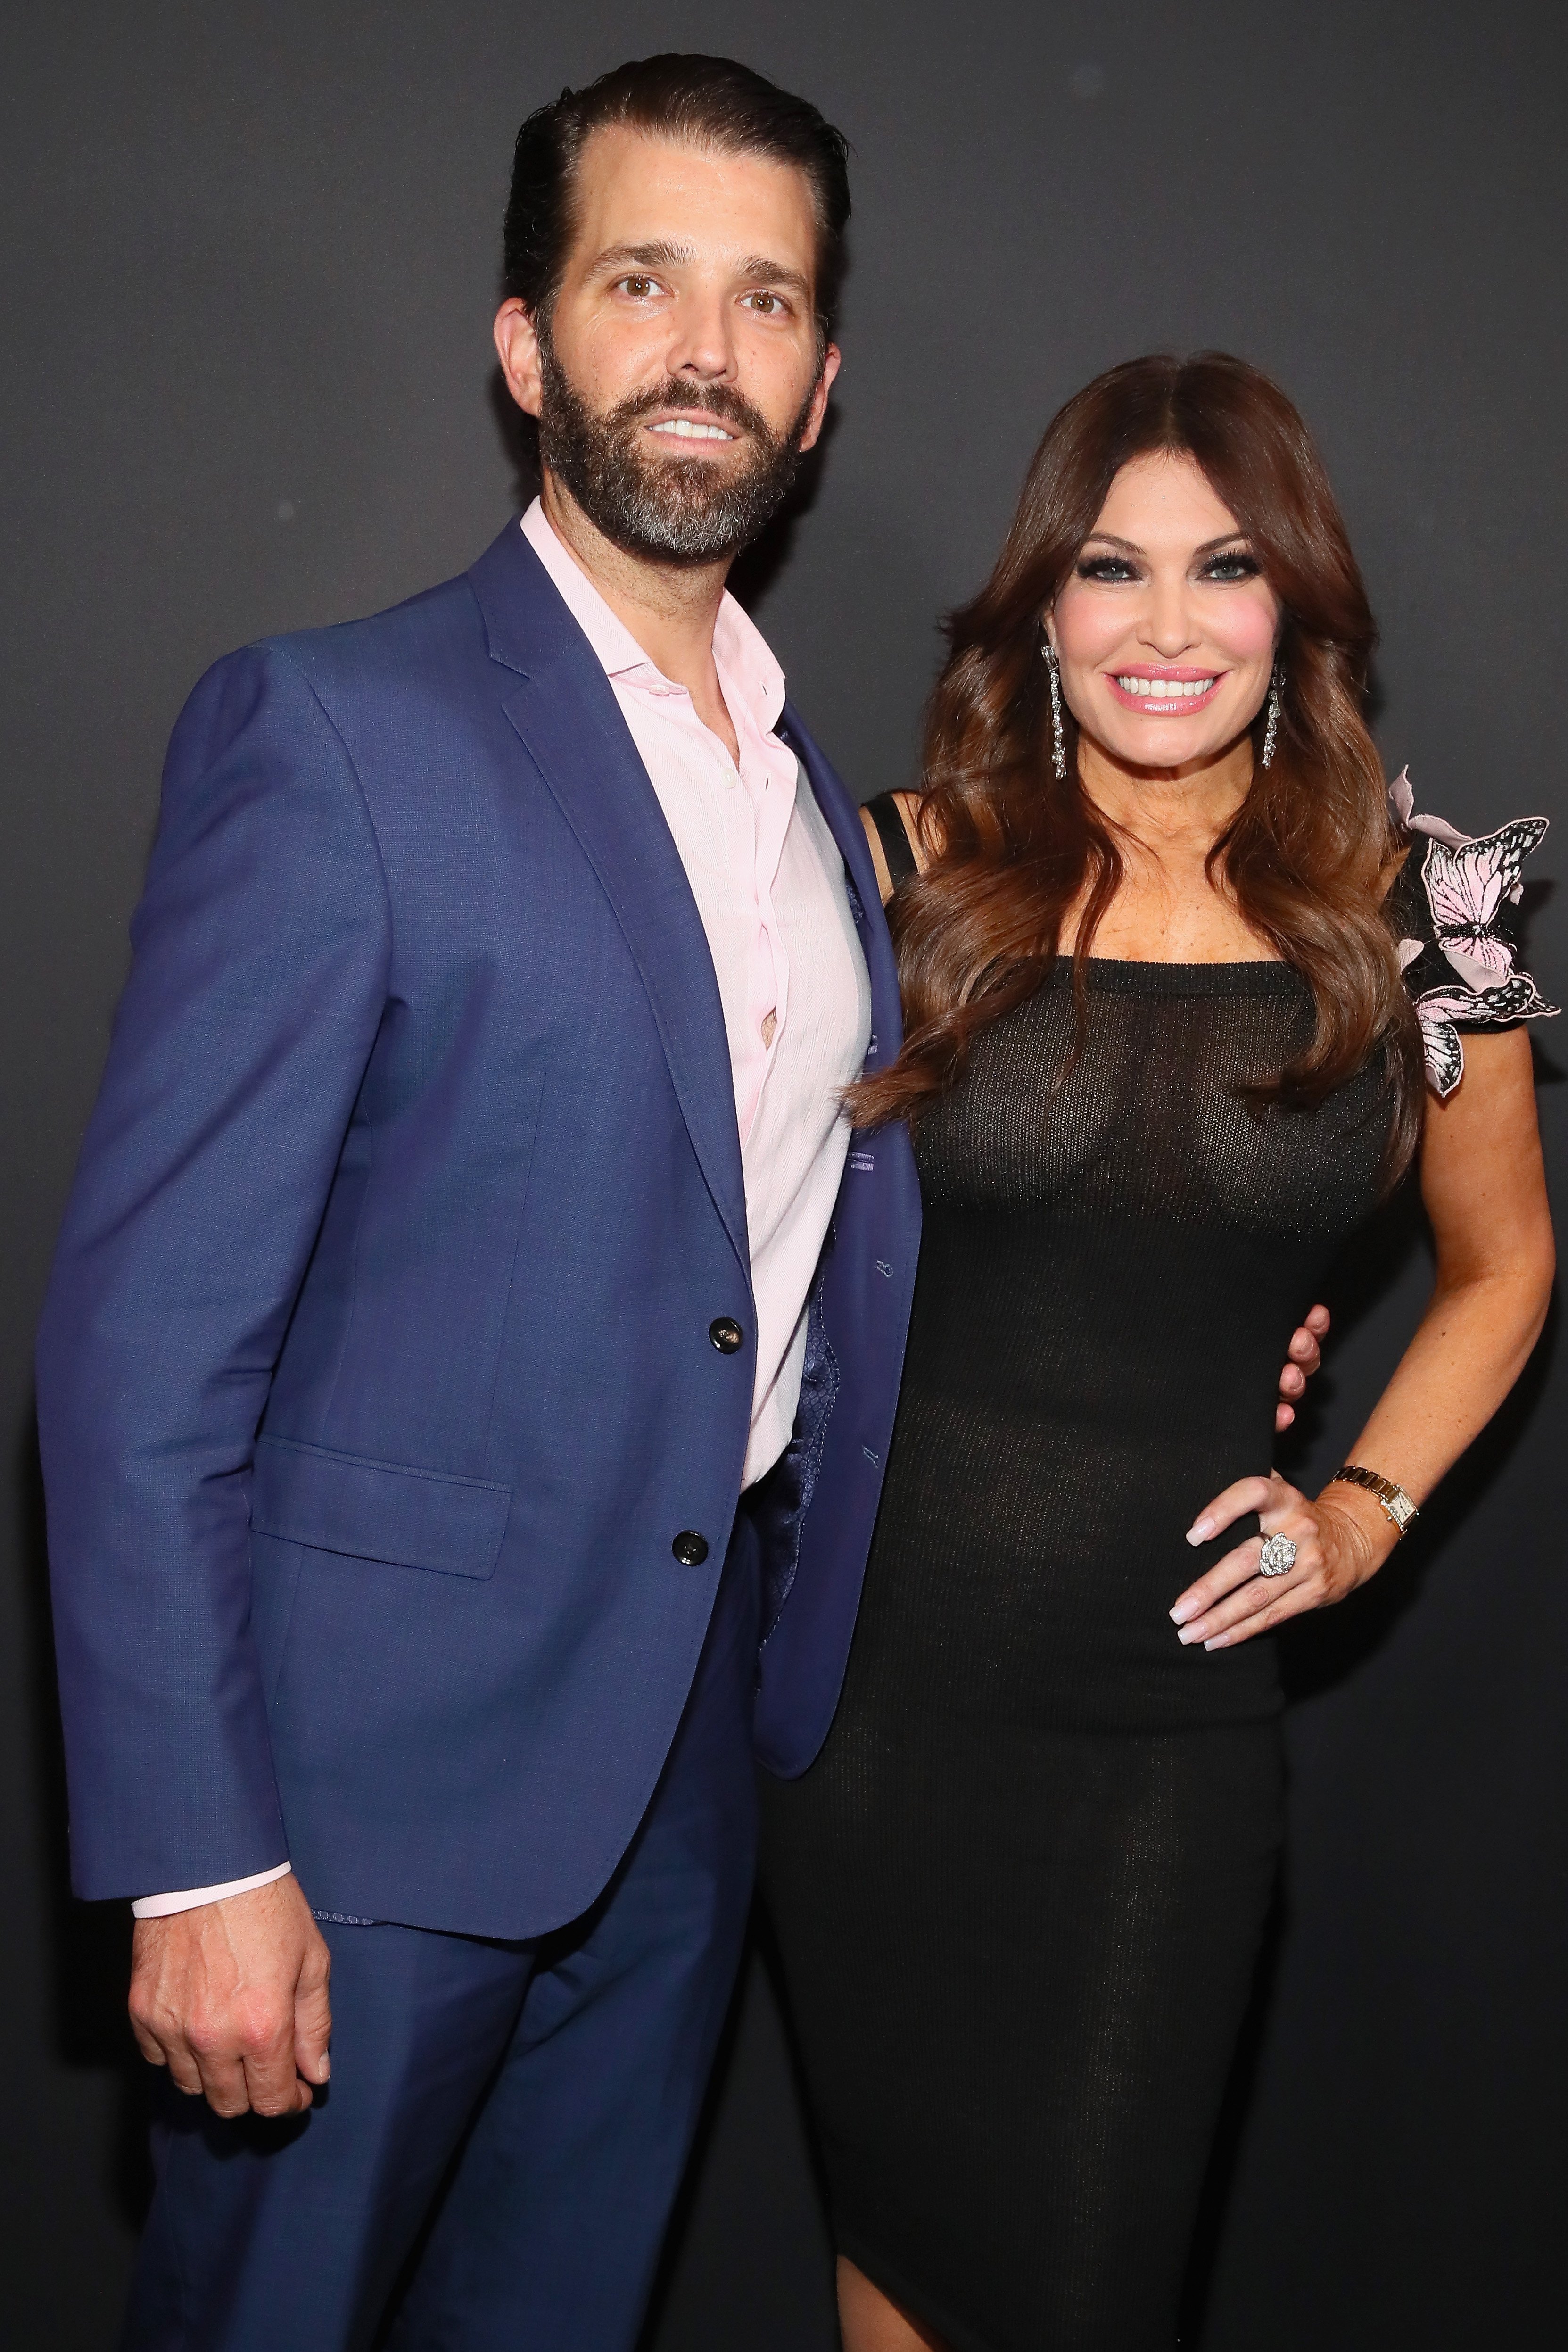 Donald Trump Jr. and Kimberly Guilfoyle backstage at the Zang Toi fashion show in New York City on February 13, 2019 | Photo: Getty Images